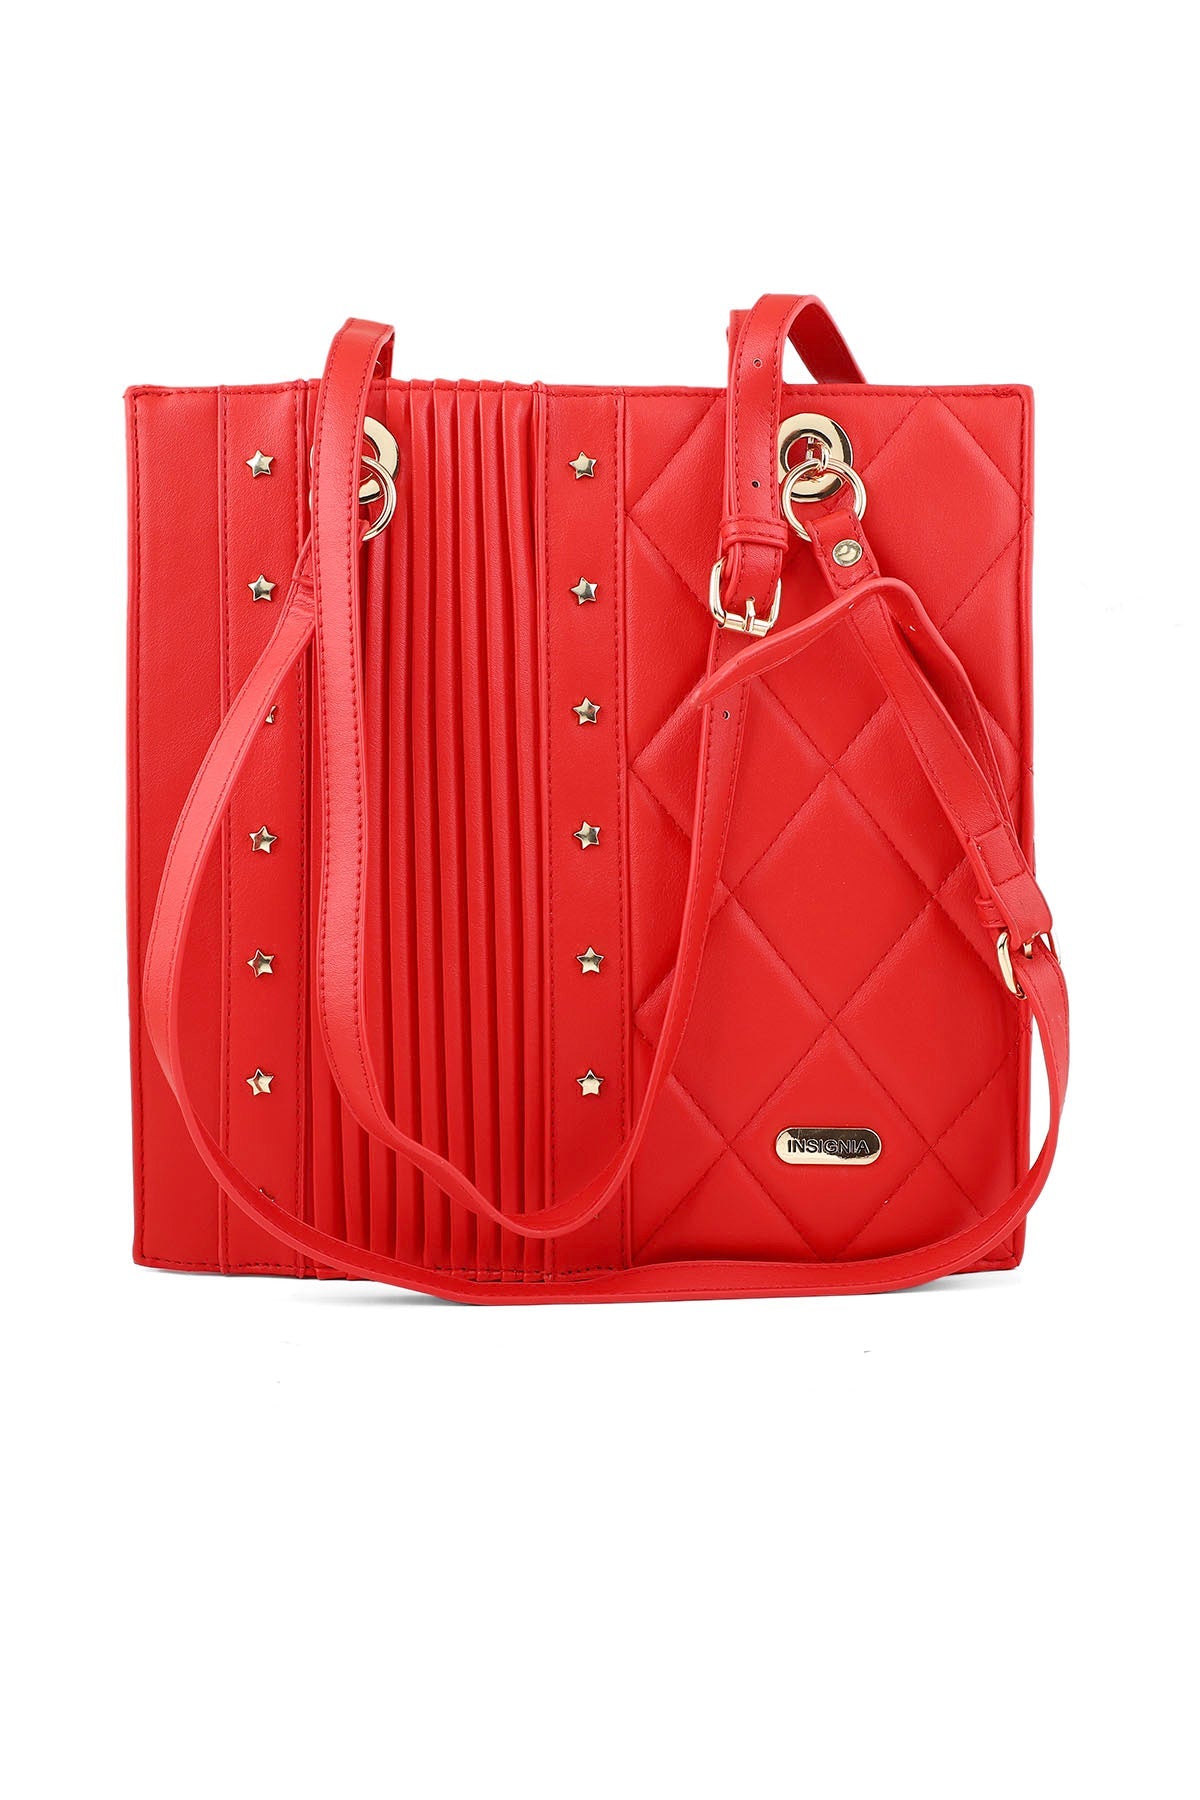 Formal Tote Hand Bags B15049-Red